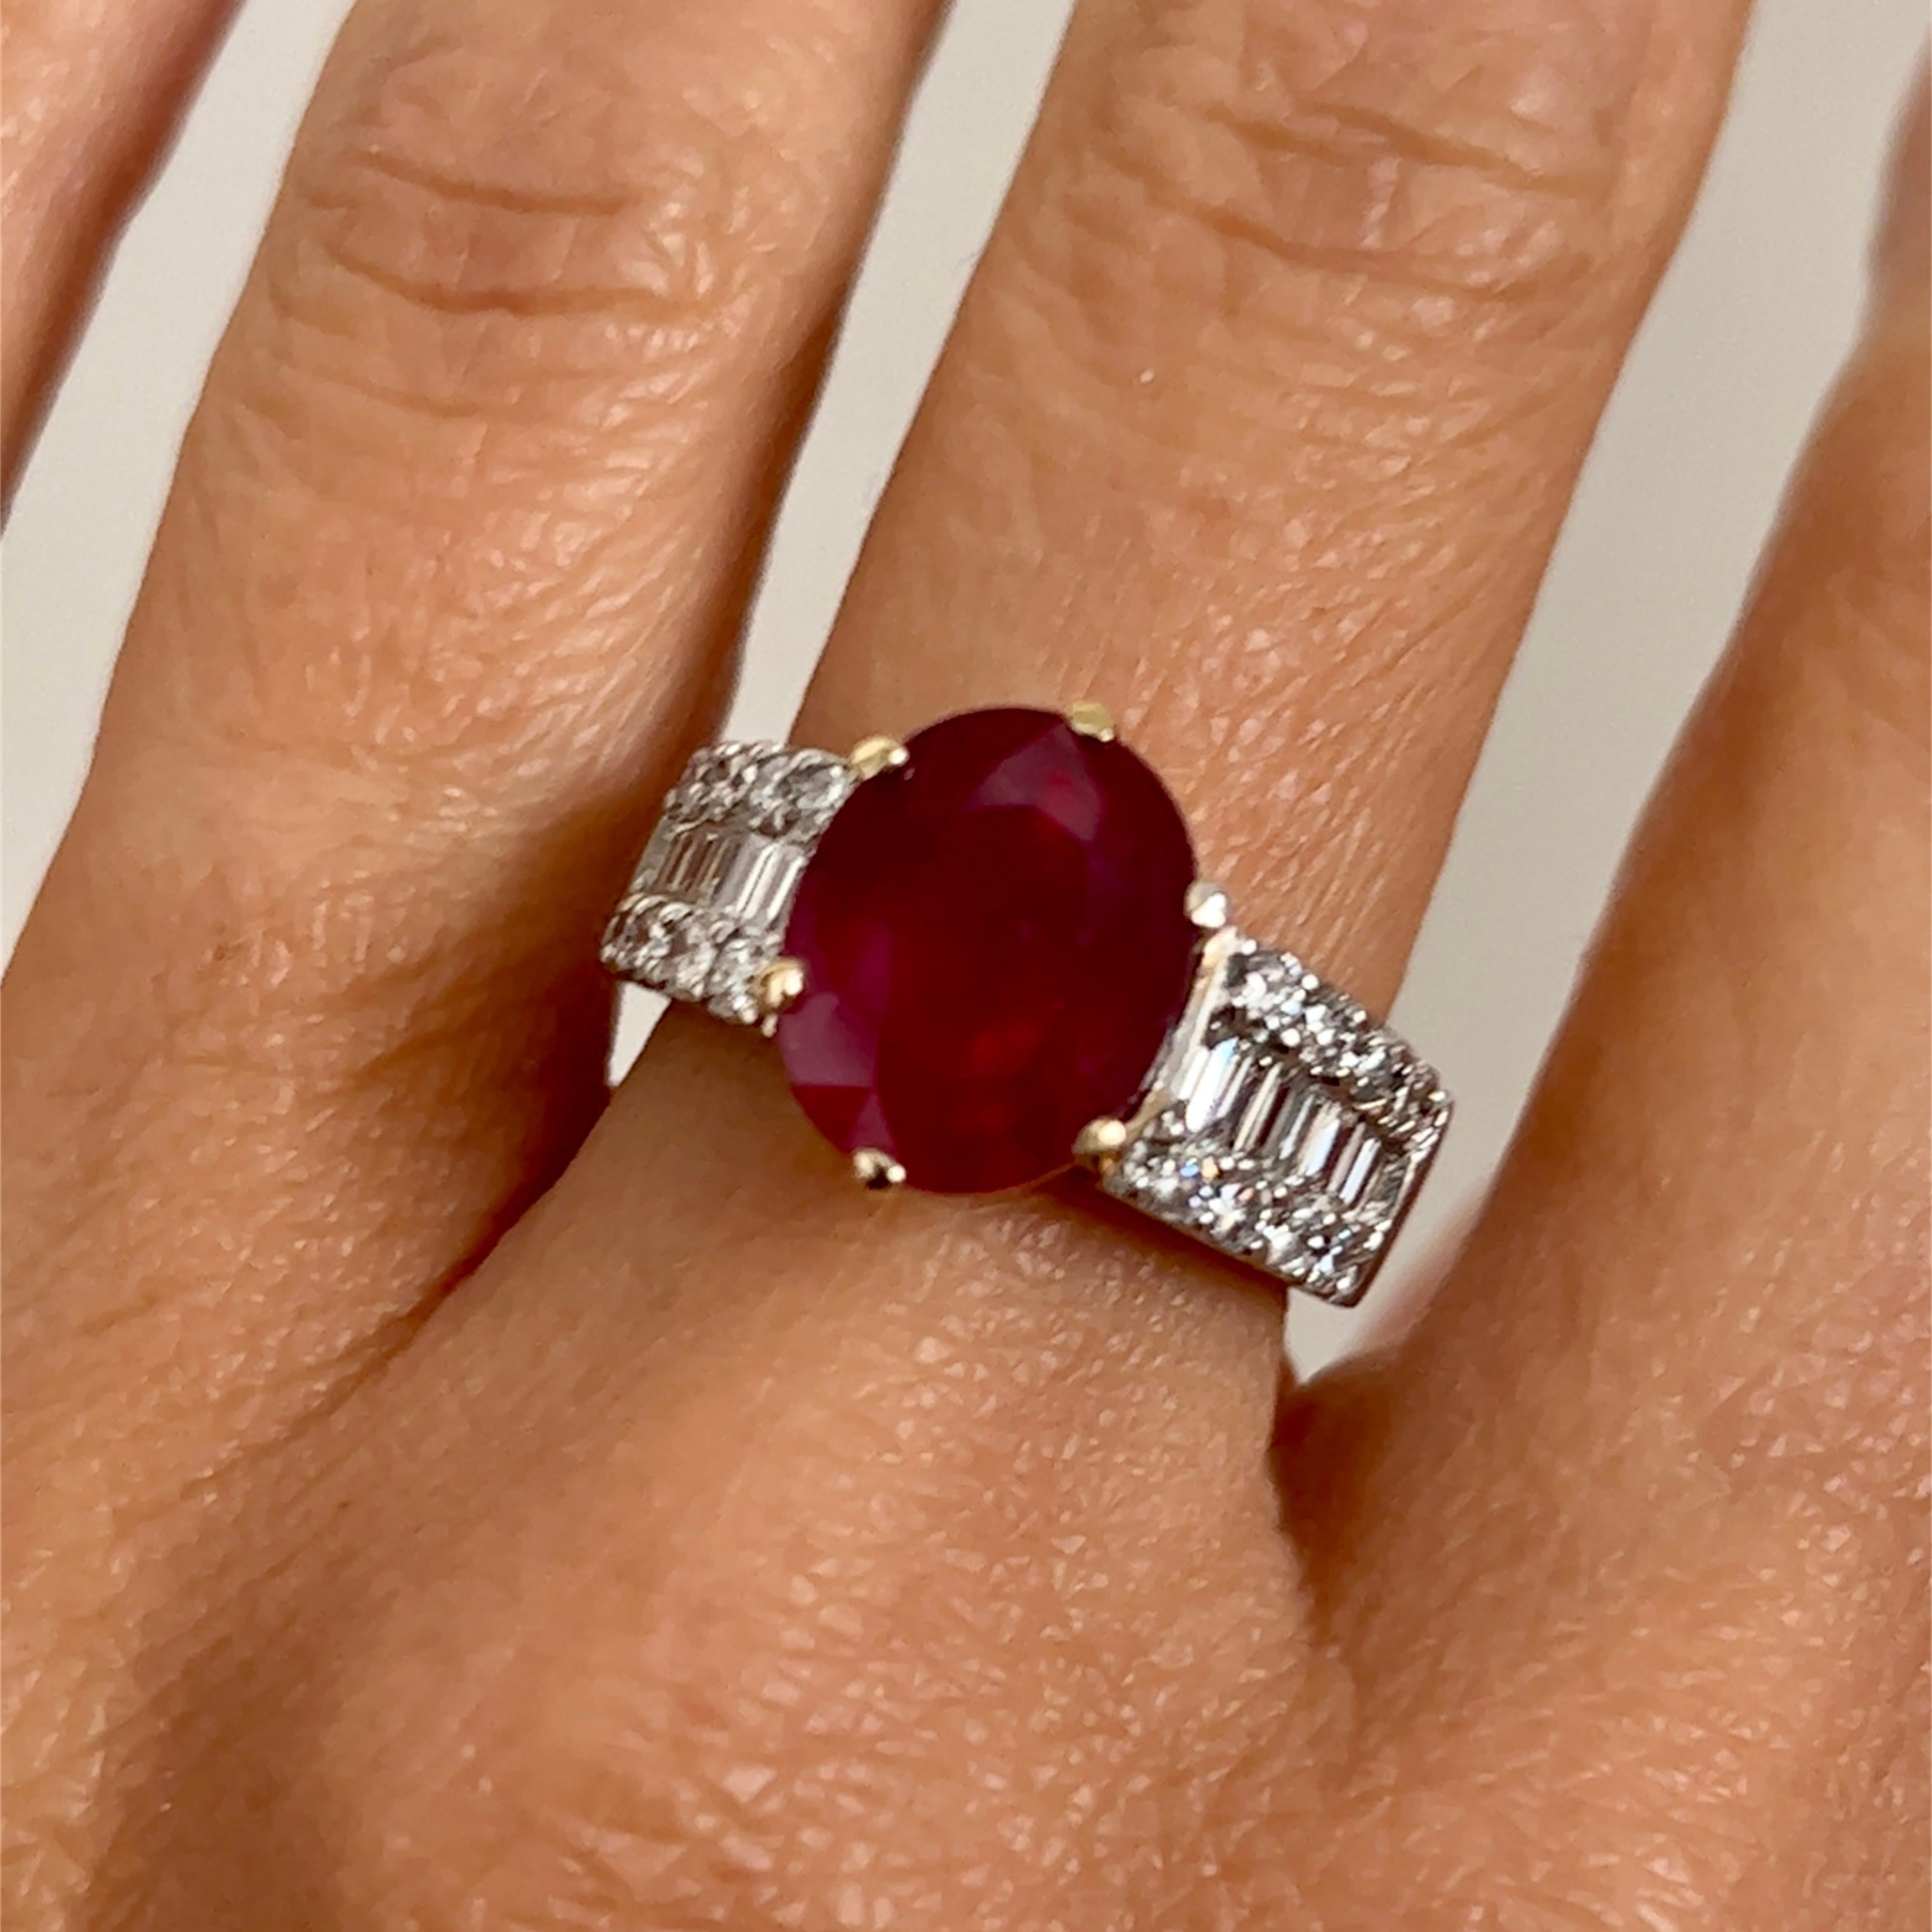 Oval 5.71 Carat Natural Ruby & Diamond Ring in 18K Gold For Sale 3